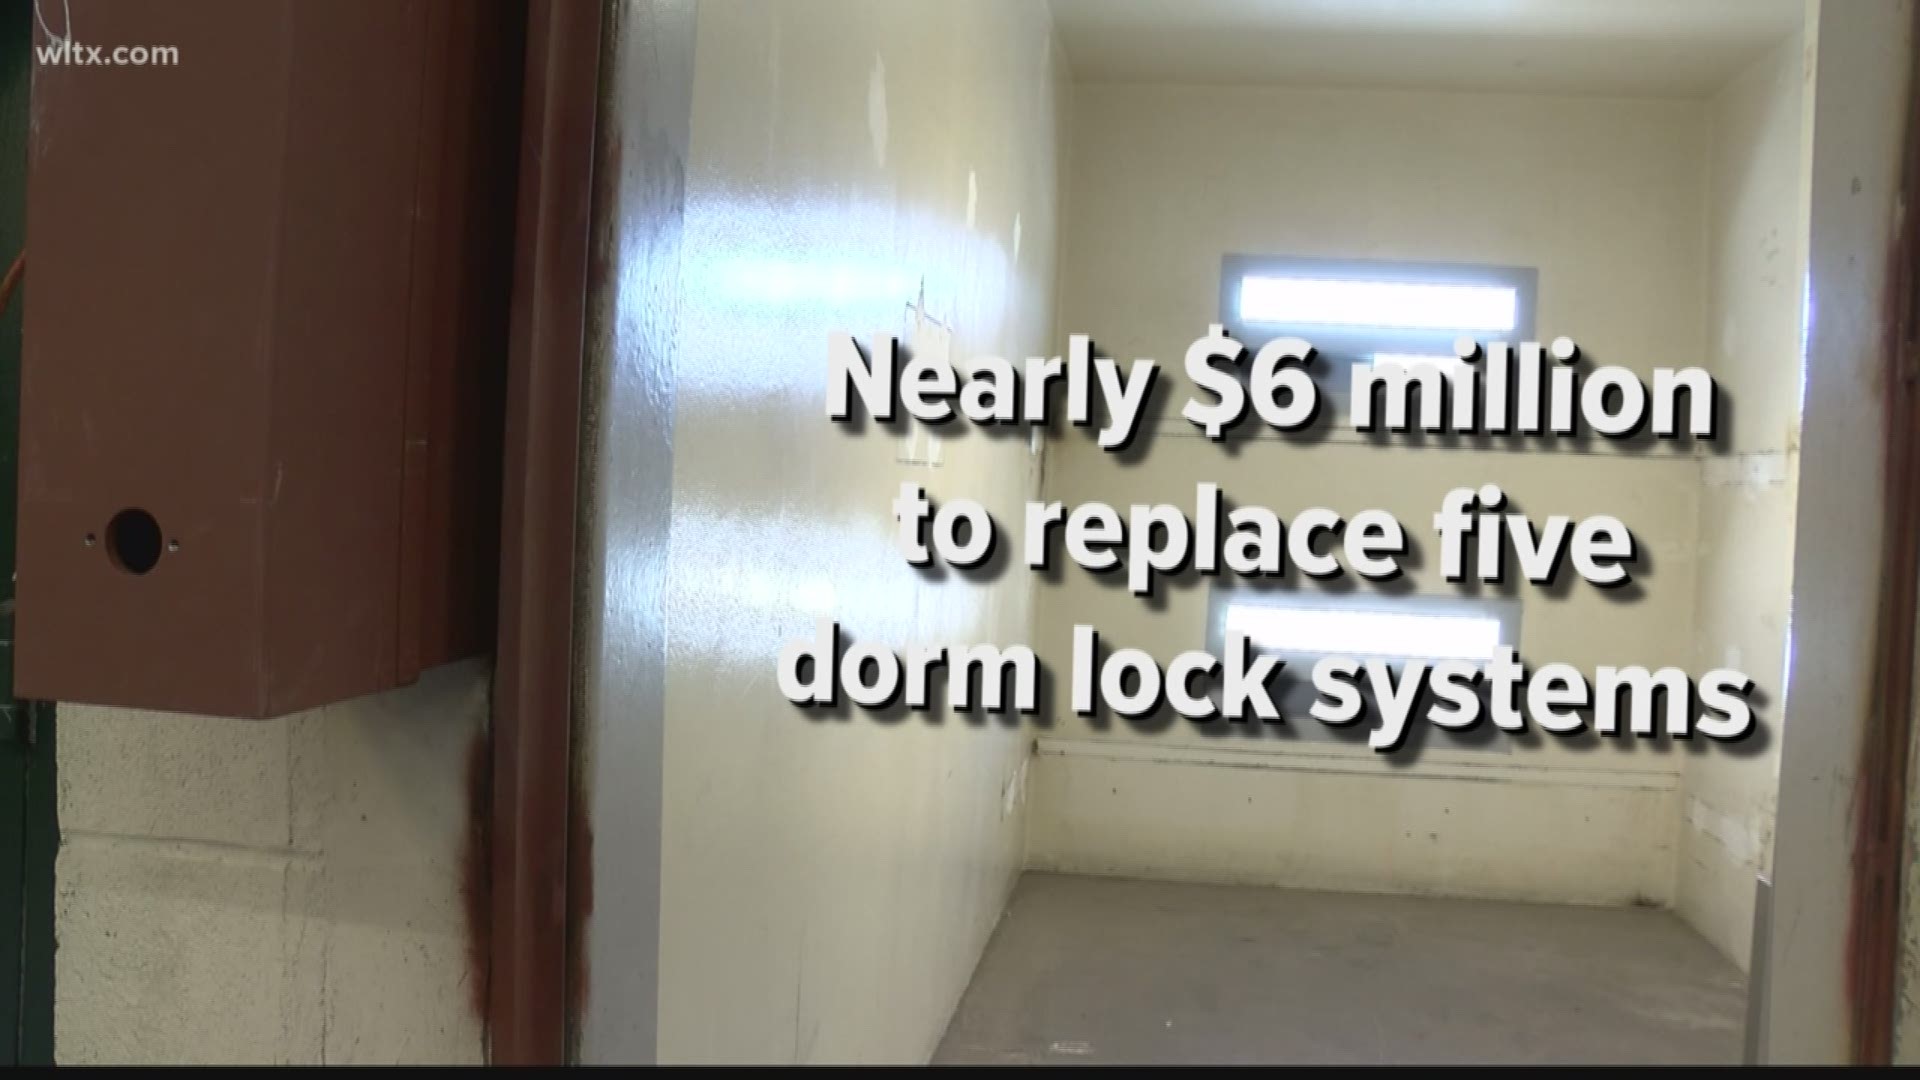 A deadly riot took place inside Lee Correctional leaving 7 seven inmates dead.
Since then the Department of Corrections has made changes to improve security not only at the level 3 security prison, but all across the state.